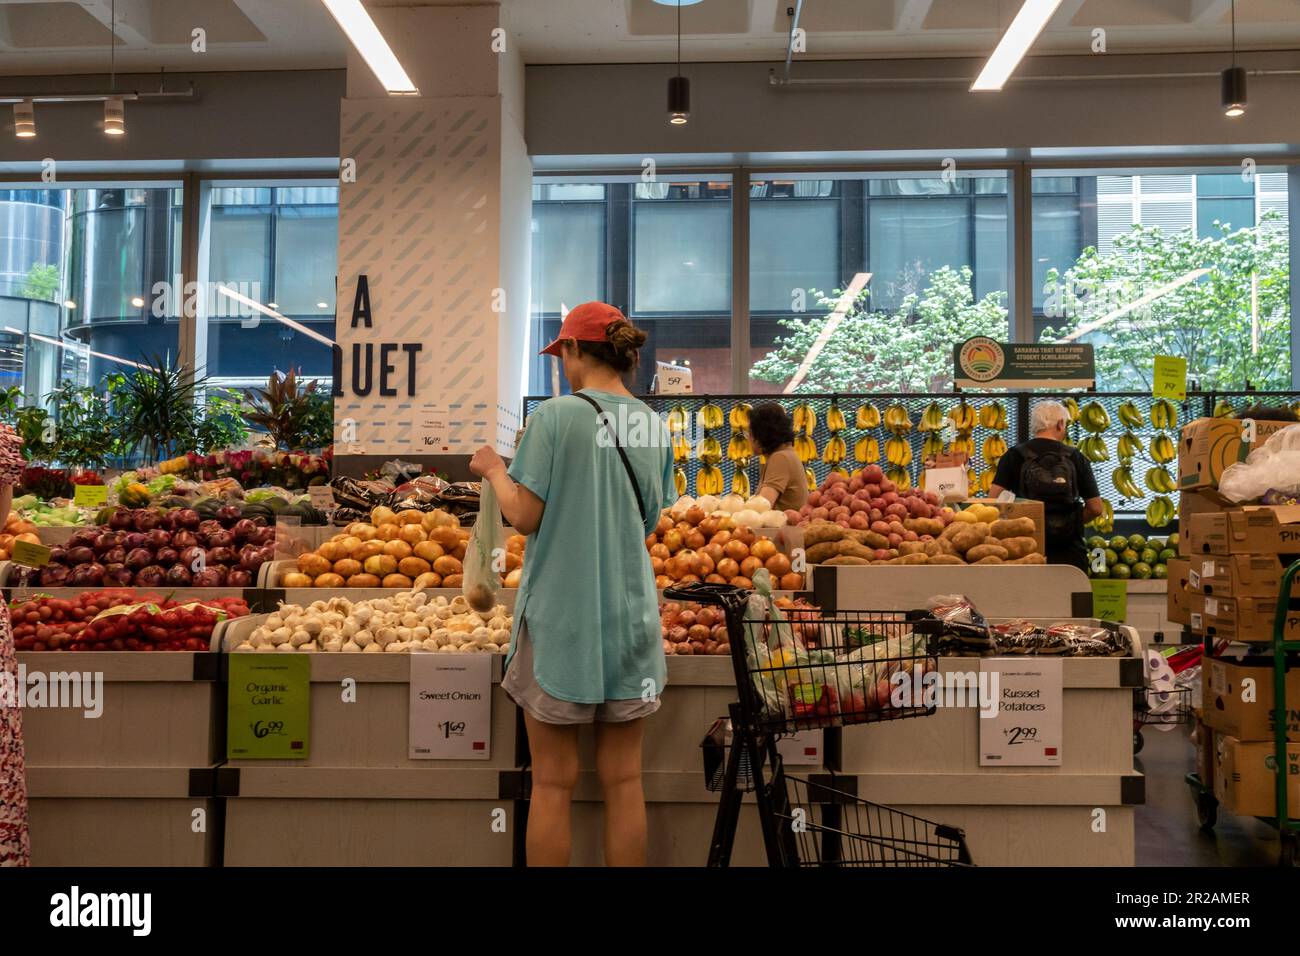 https://c8.alamy.com/comp/2R2AMER/shopping-in-a-whole-foods-market-supermarket-in-new-york-on-friday-may-12-2023-the-consumer-price-index-is-reported-to-have-increased-49-over-the-last-year-the-lowest-level-since-april-2021-implying-that-food-prices-have-cooled-richard-b-levine-2R2AMER.jpg